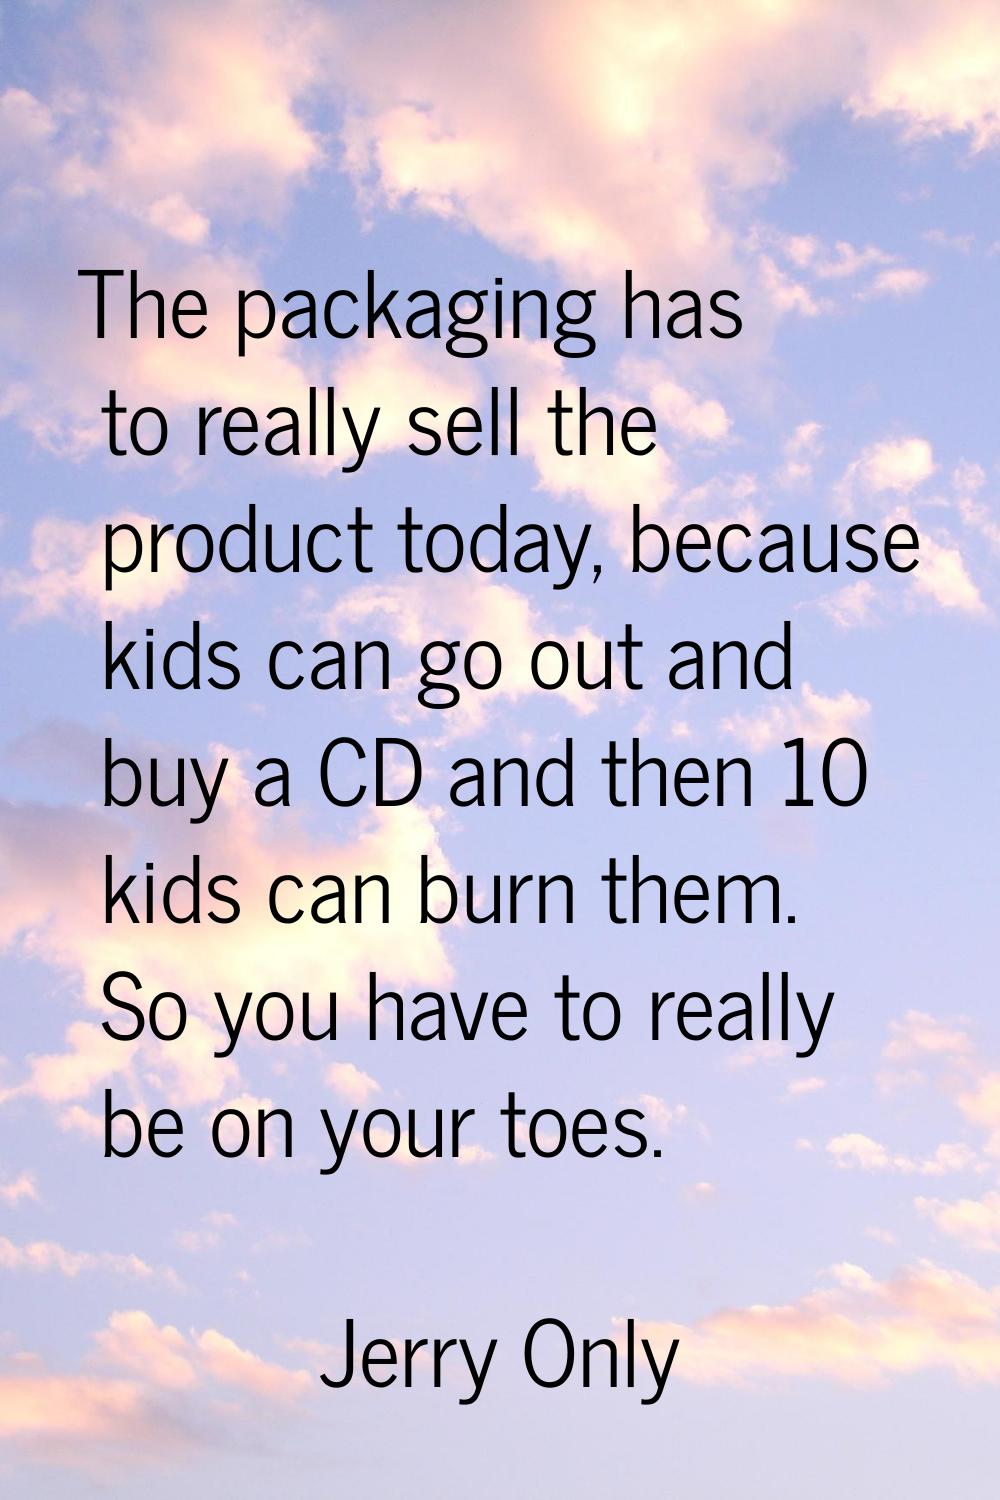 The packaging has to really sell the product today, because kids can go out and buy a CD and then 1